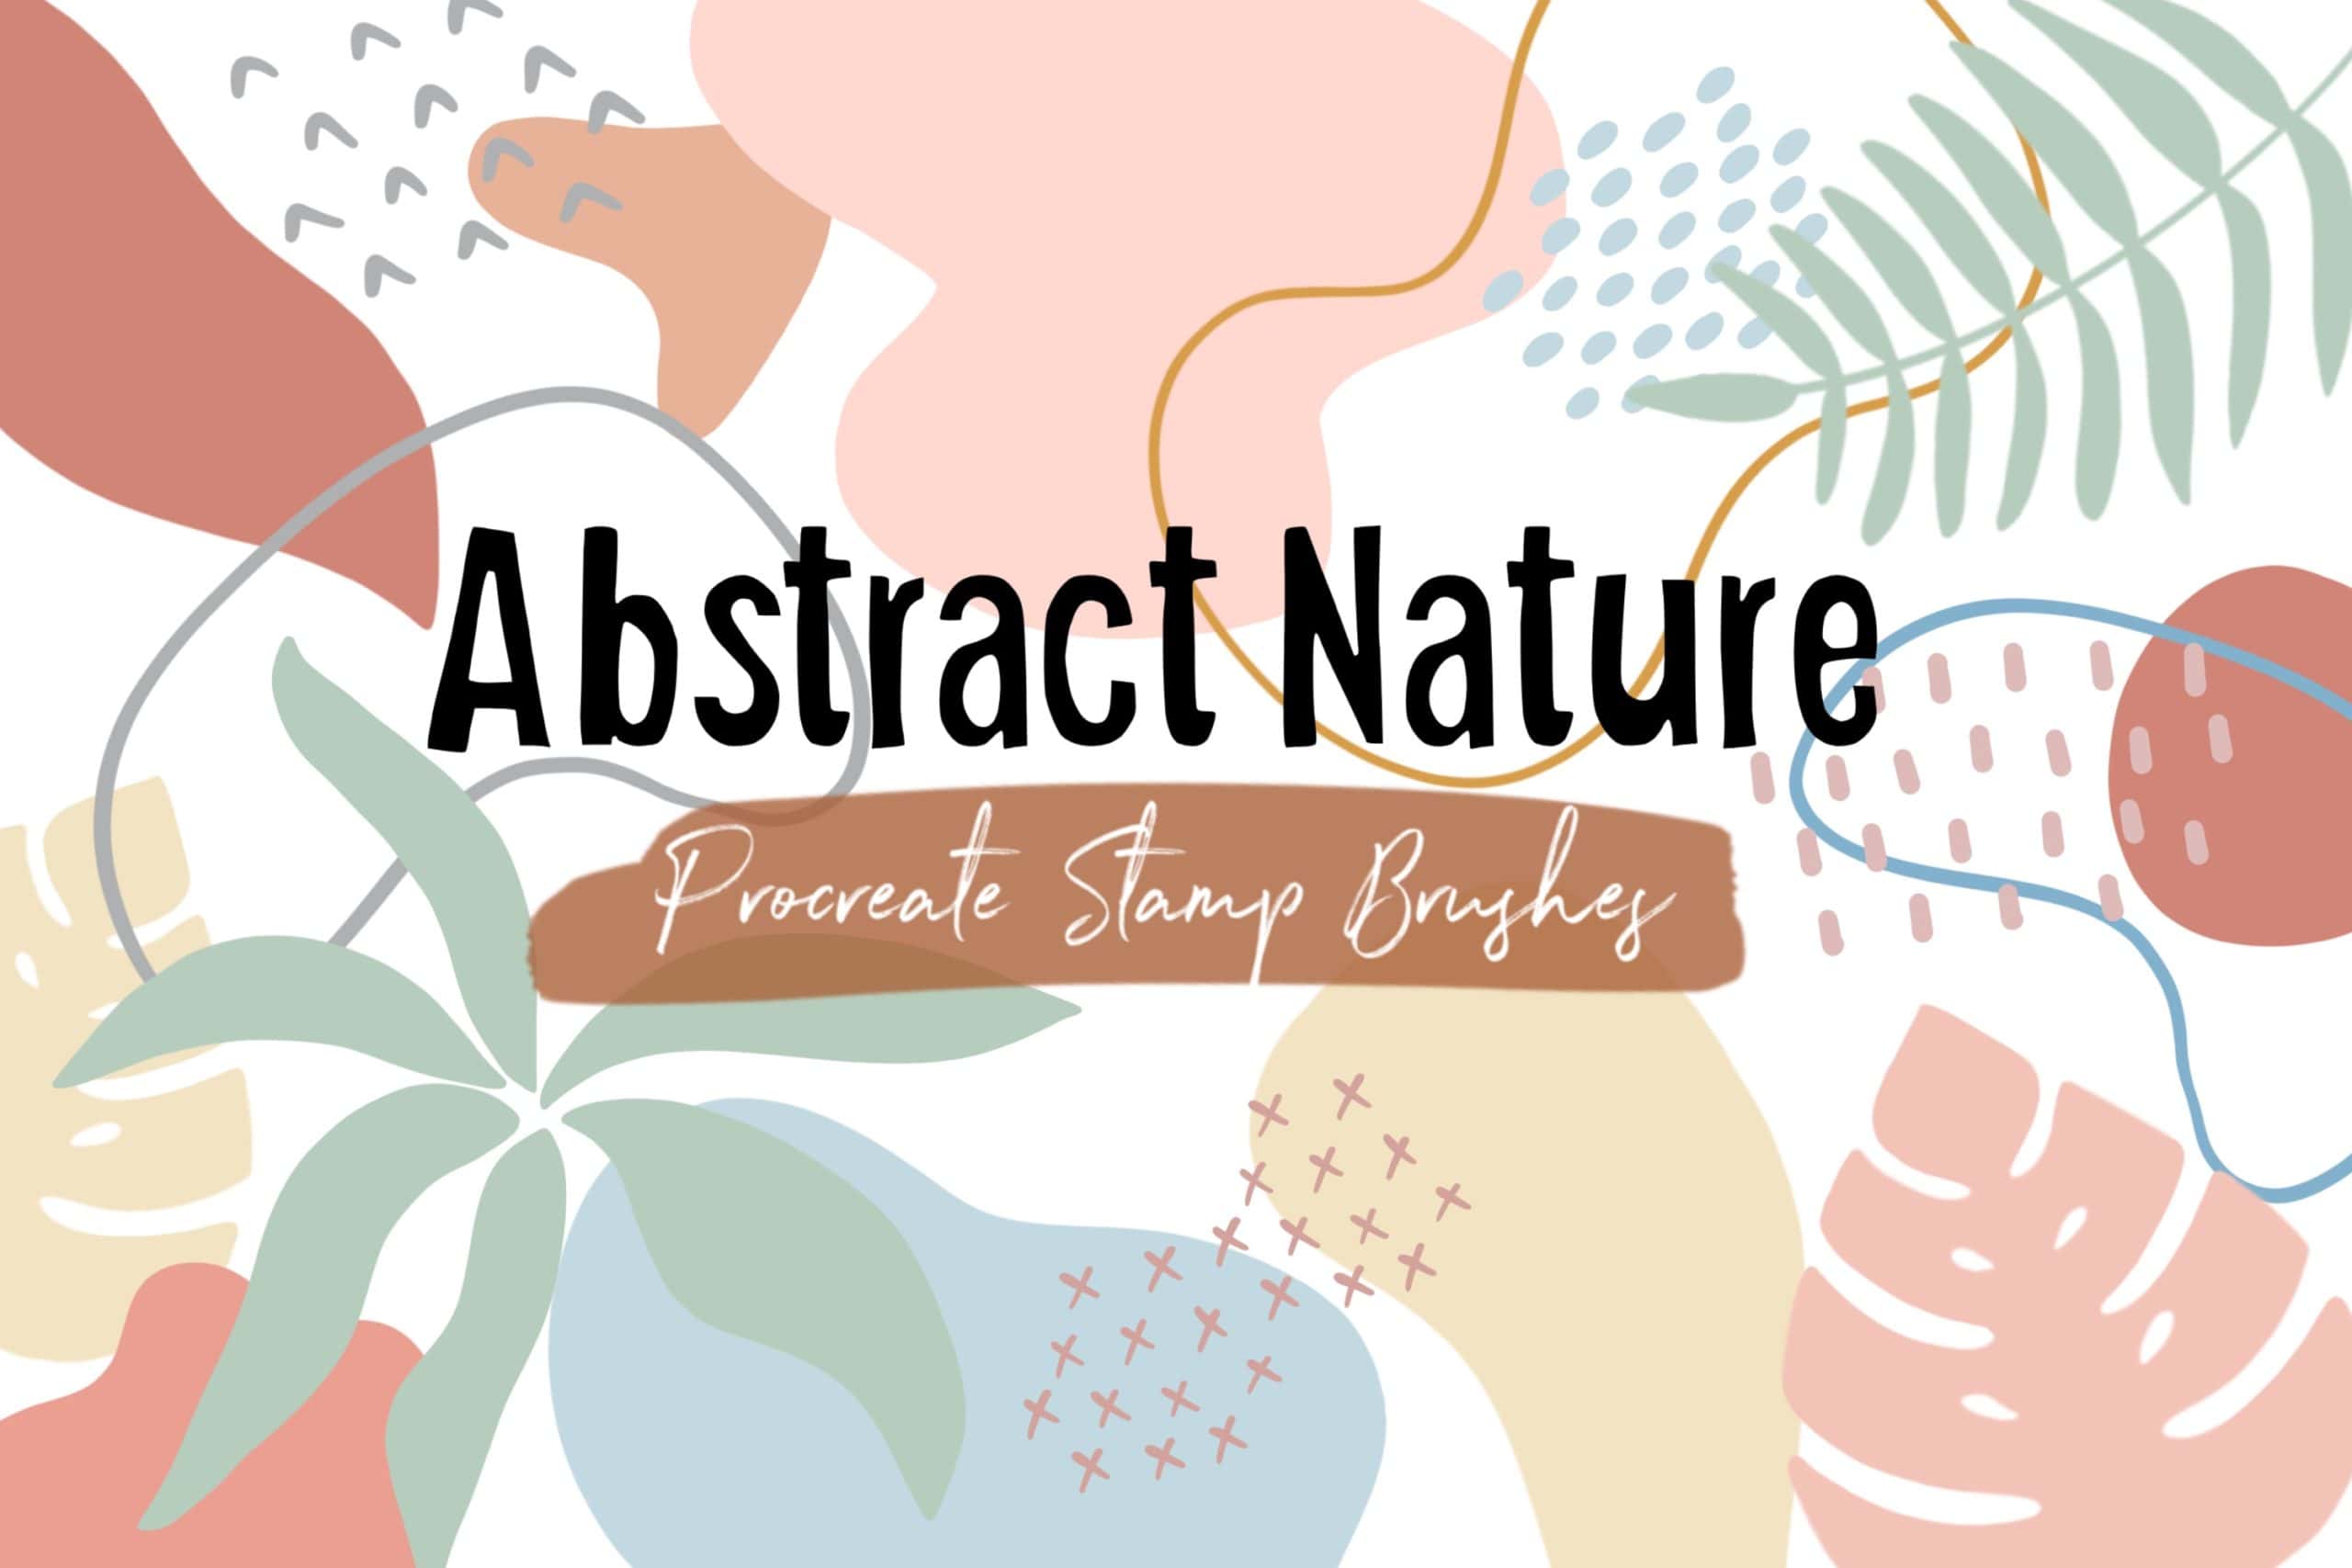 Abstract Nature Procreate Stamp Brushes